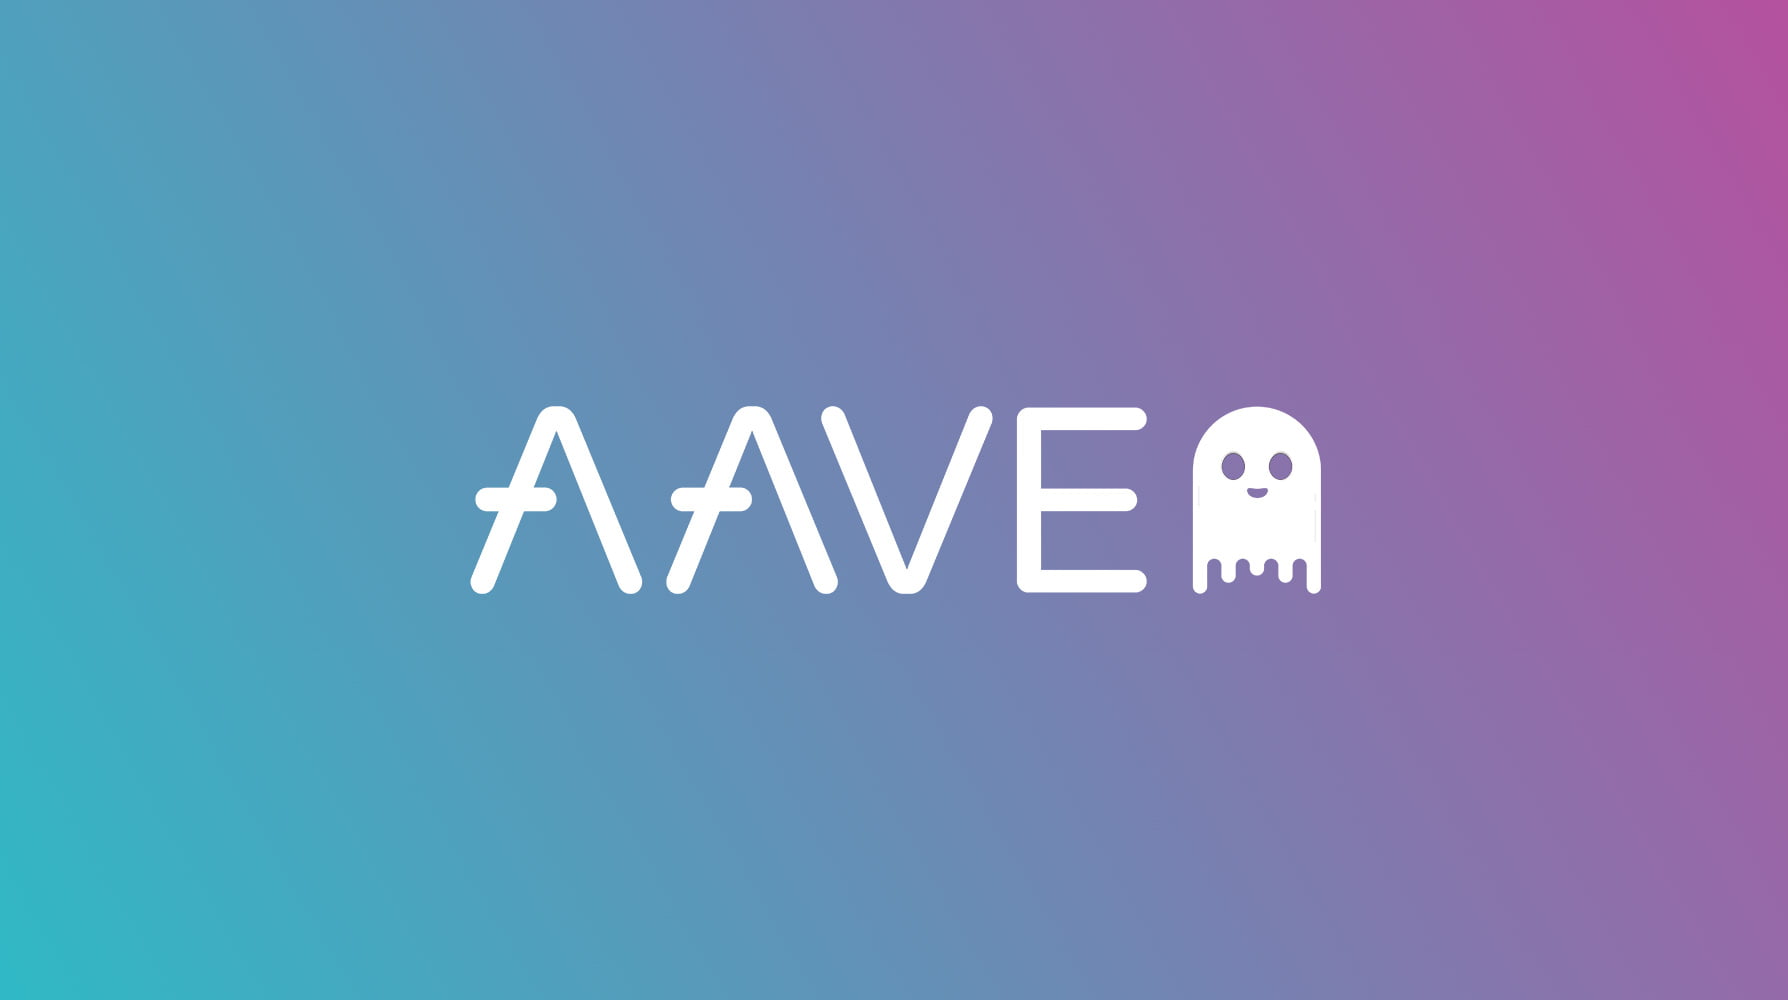 Blog: Aave and interest income in cryptocurrencies